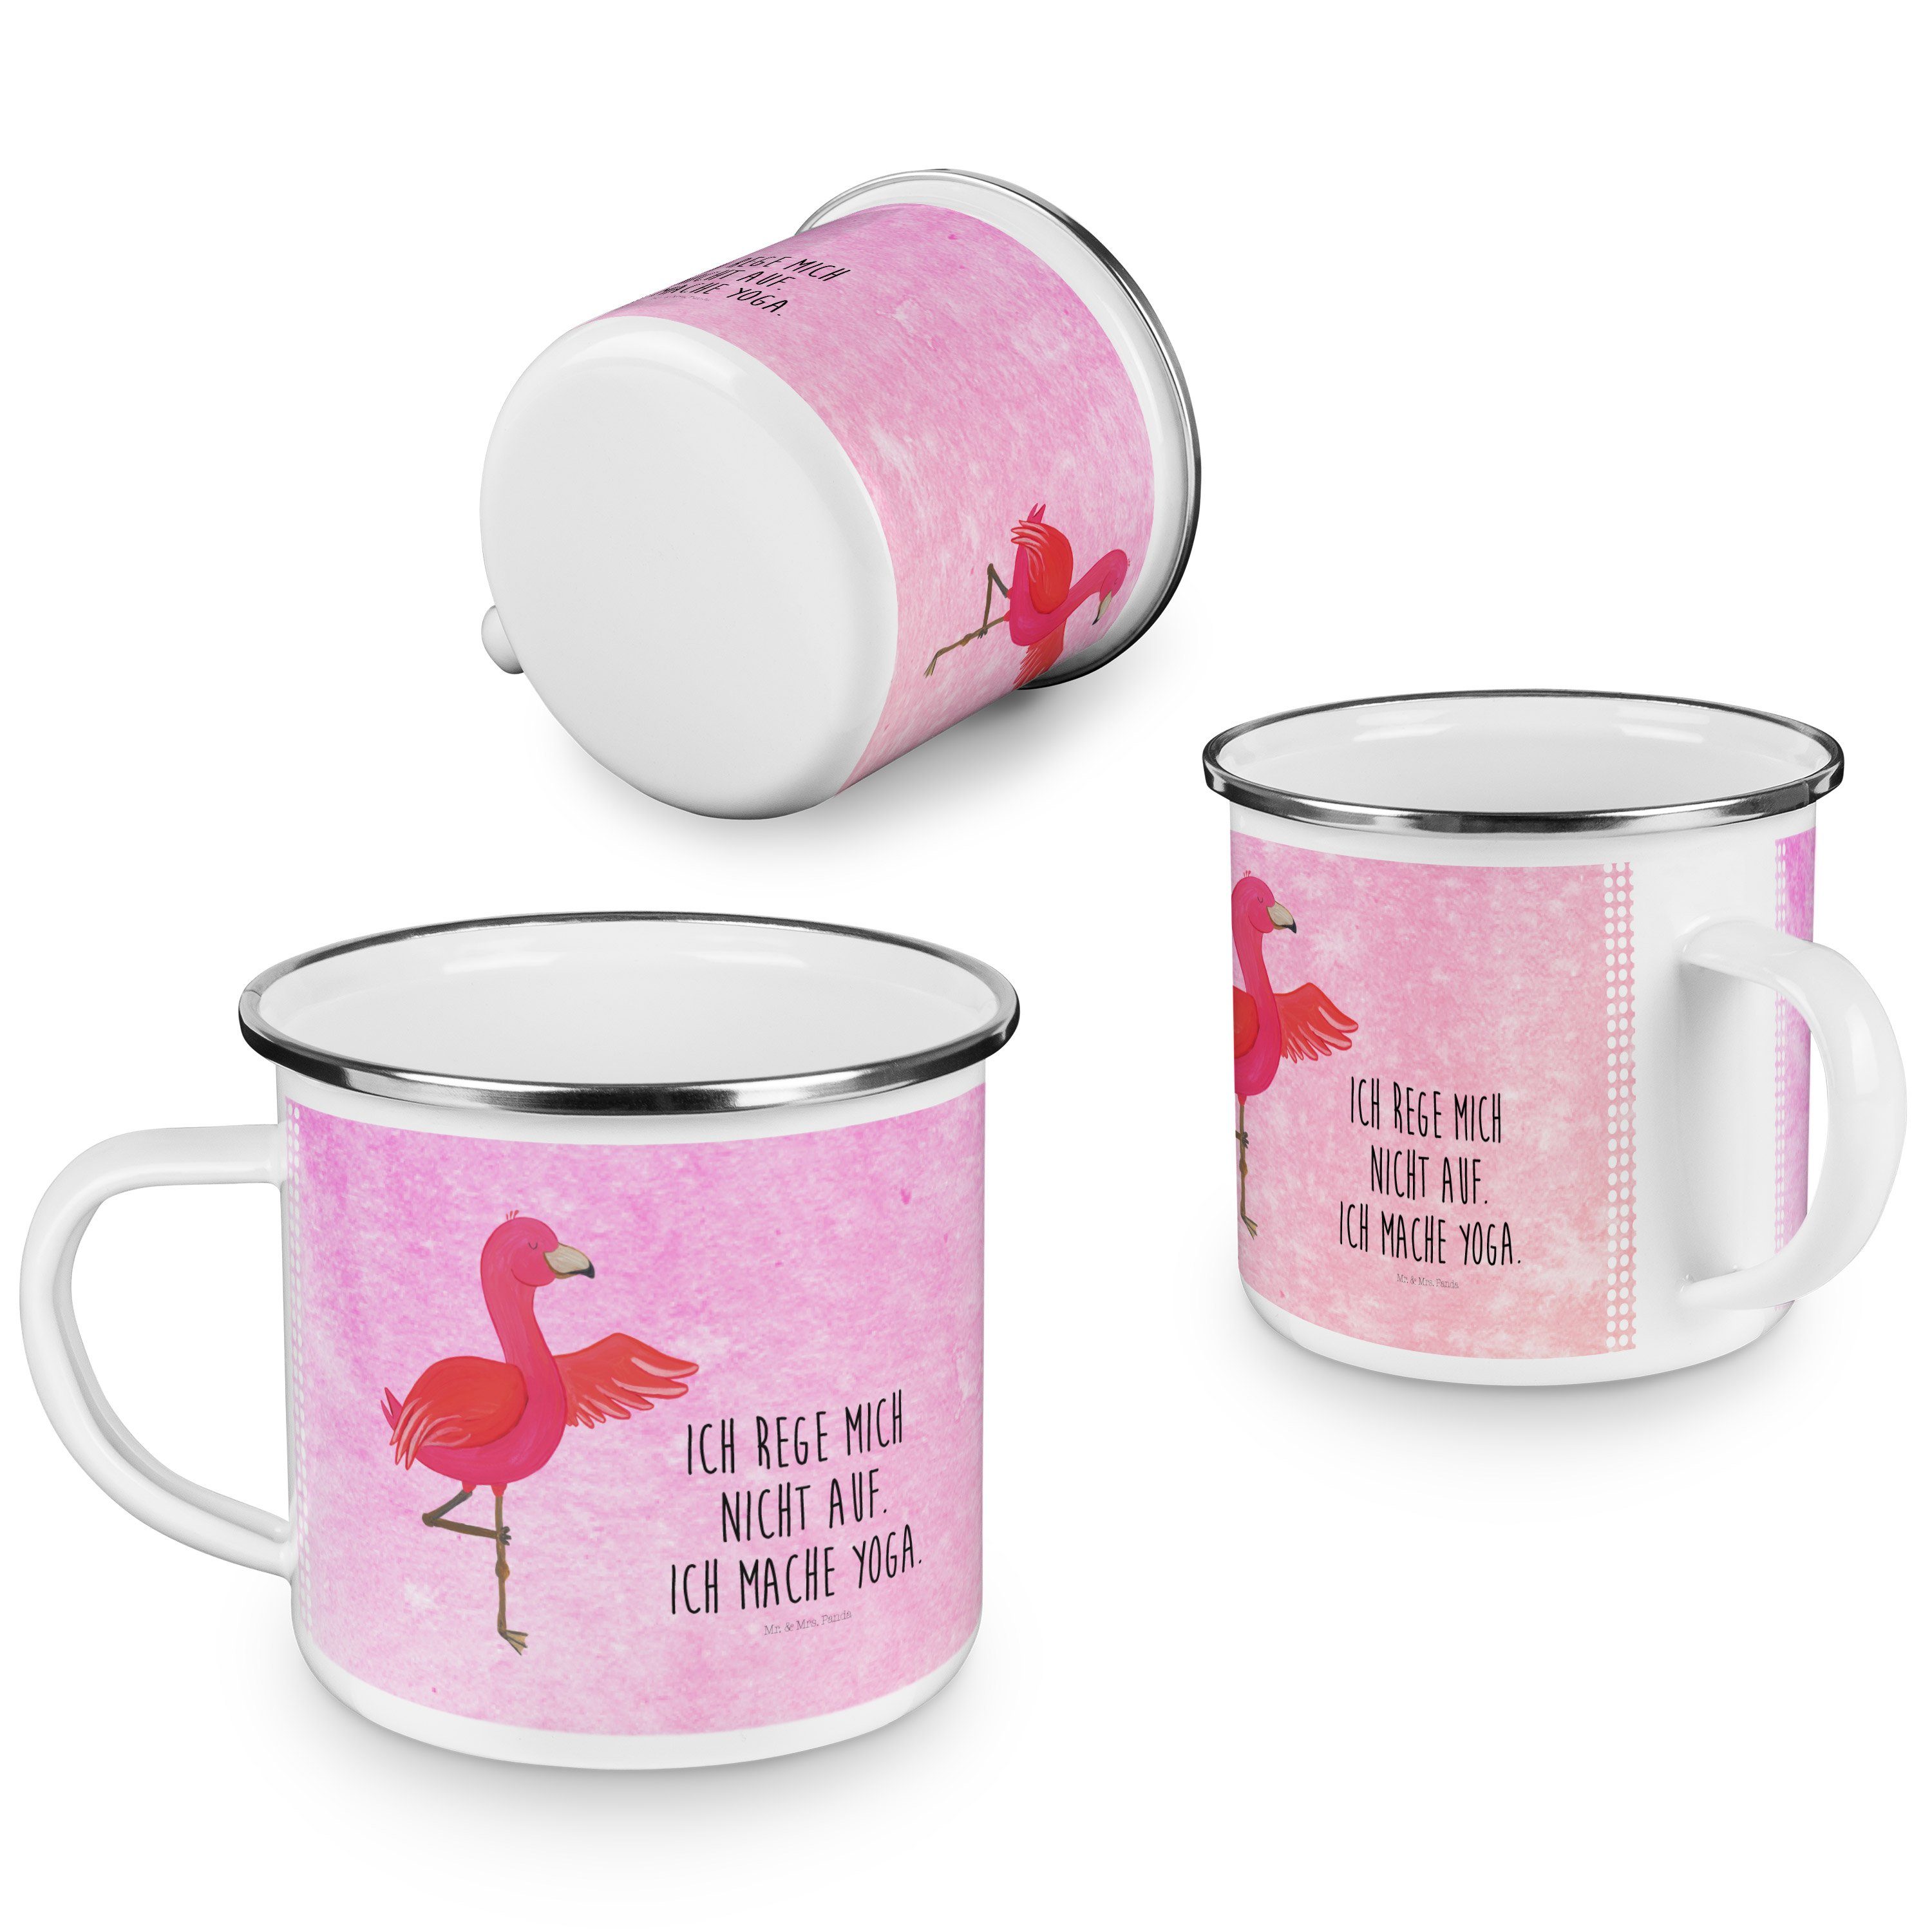 Yoga, Aquarell Campingbecher, - Panda Becher - Yoga Flamingo & Emaille Pink Geschenk, Emaille Mr. Mrs.